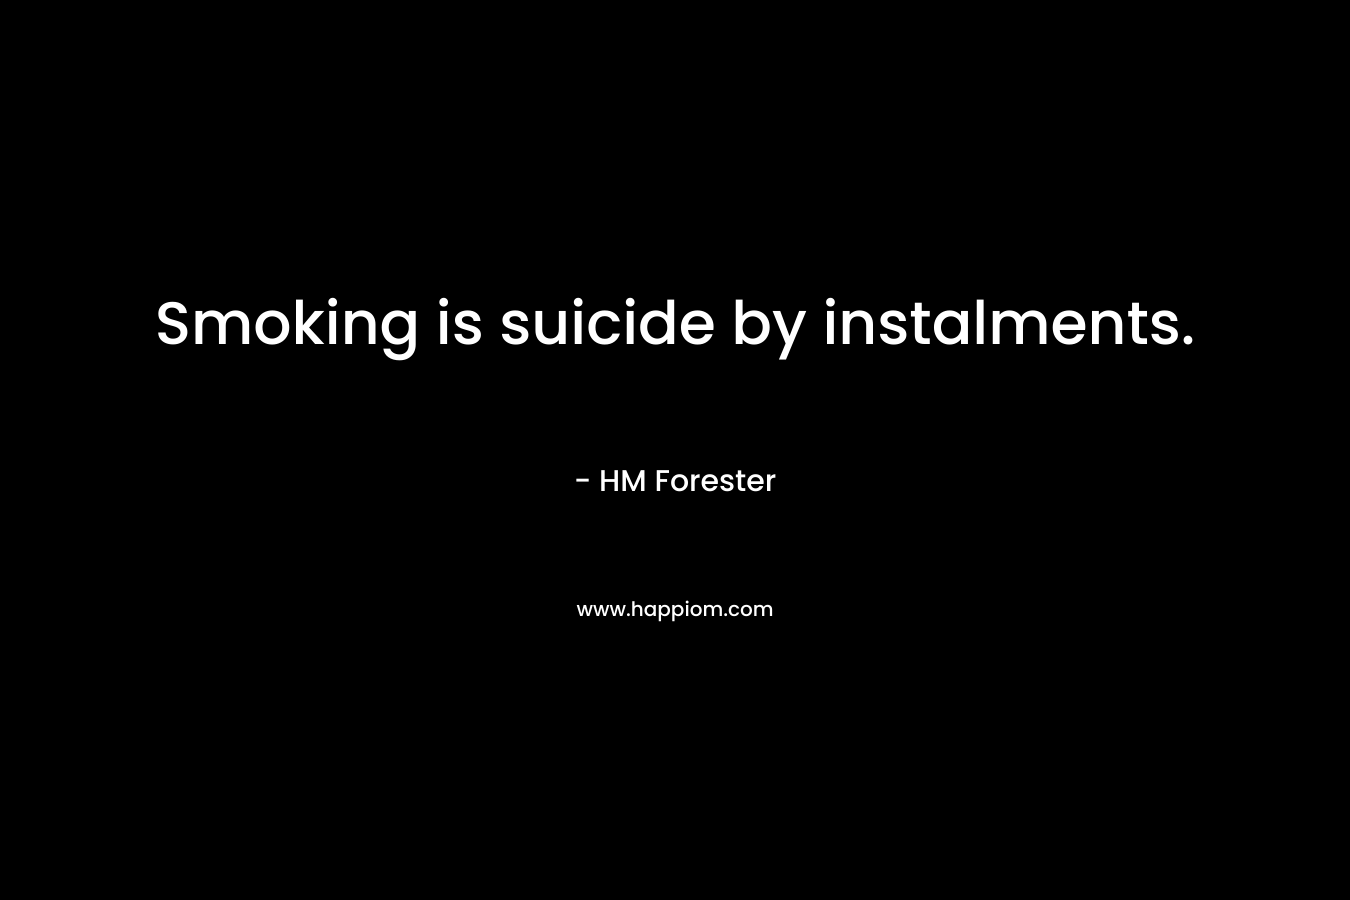 Smoking is suicide by instalments. – HM Forester